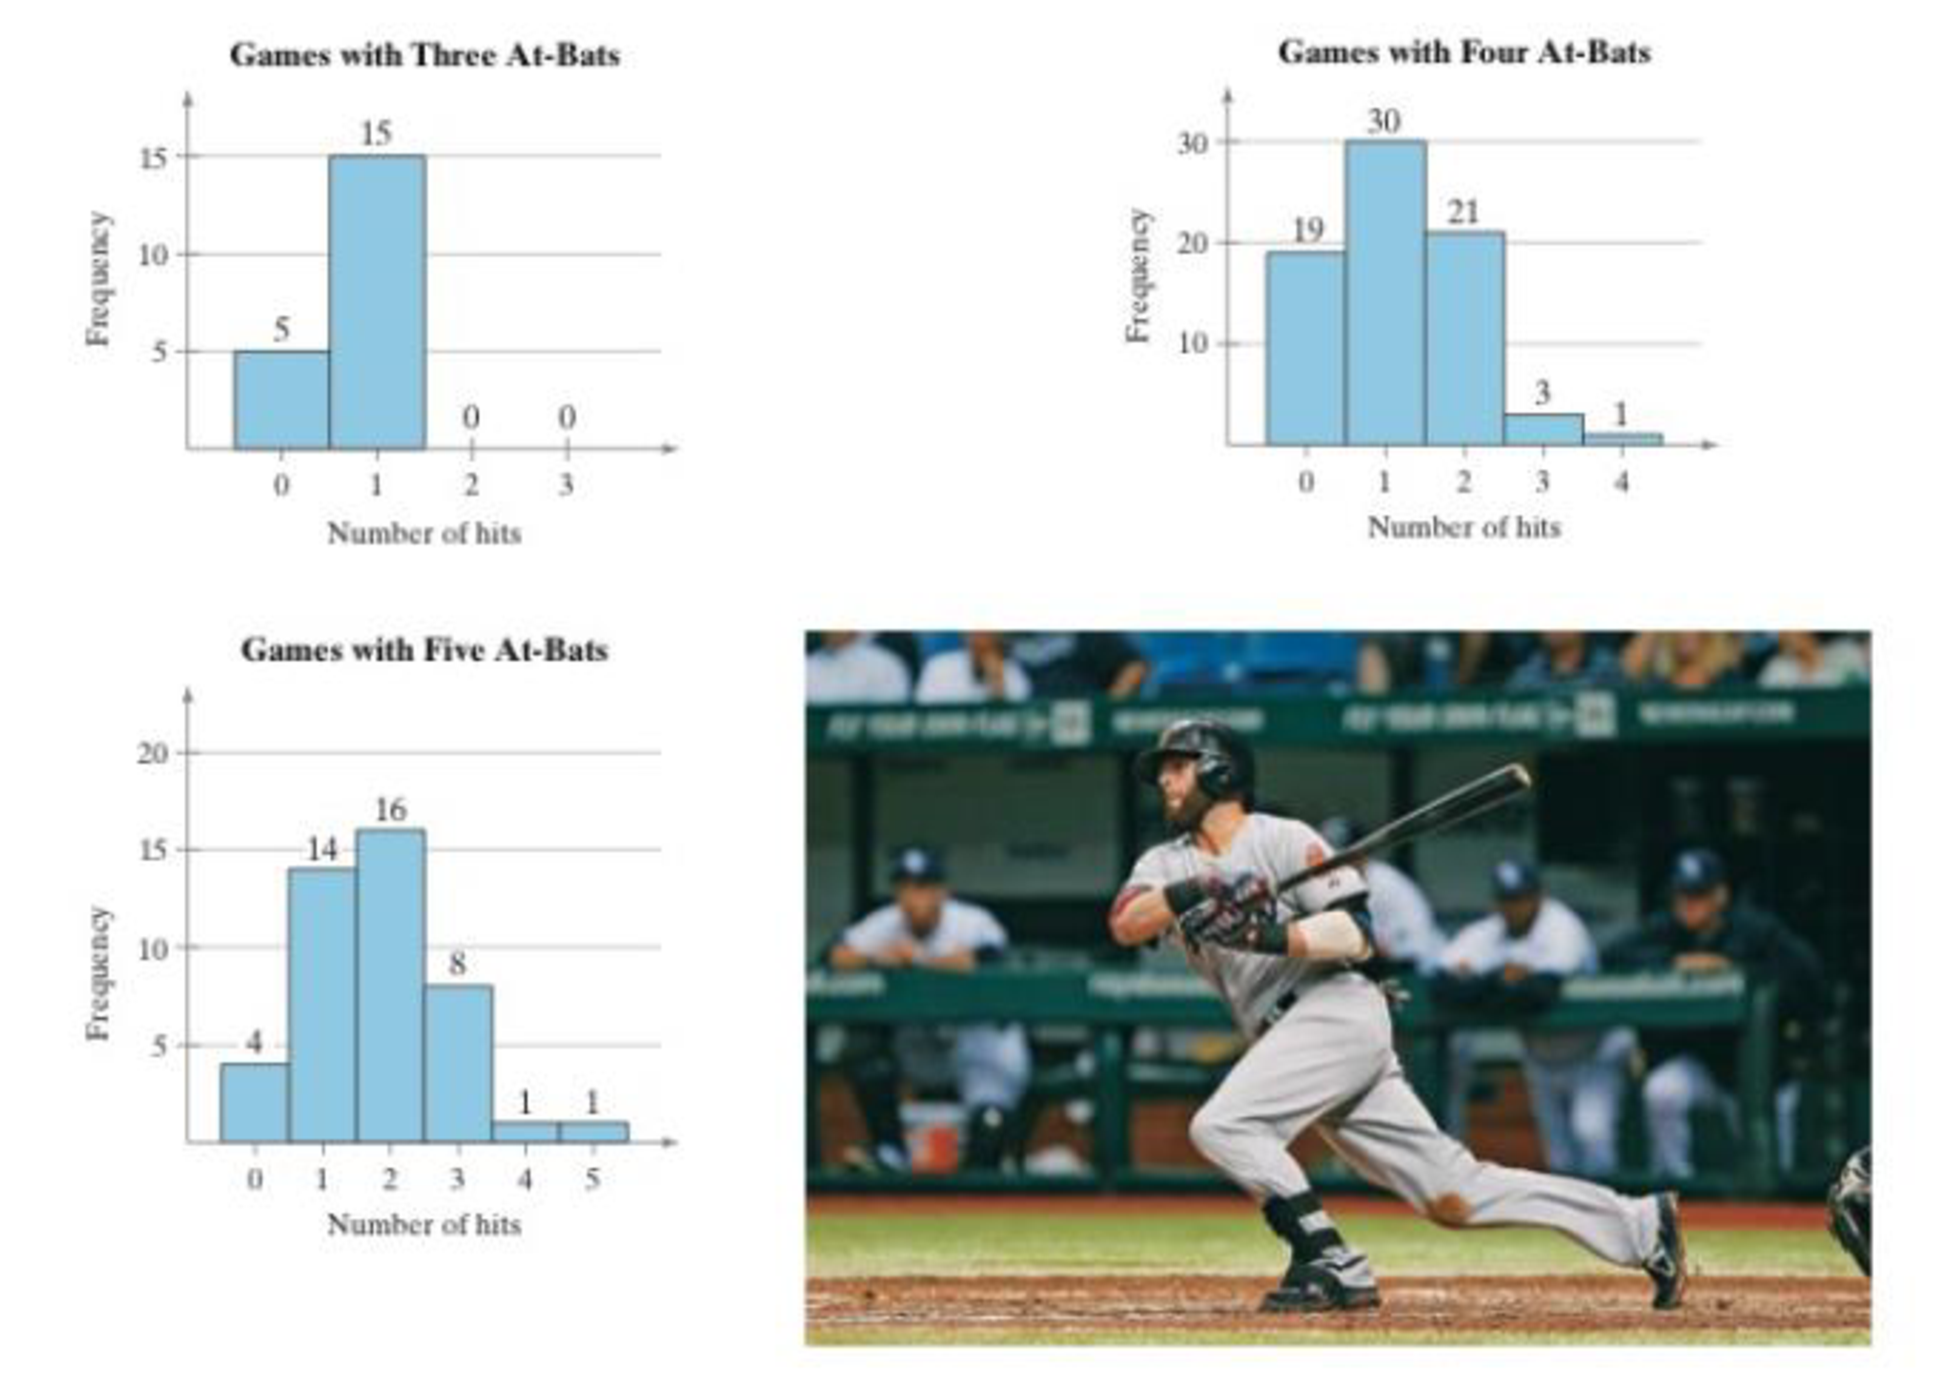 Chapter 4.2, Problem 1CS, 1. Construct a <x-custom-btb-me data-me-id='2232' class='microExplainerHighlight'>probability</x-custom-btb-me> distribution for the number of hits in games with (a) 3 at-bats. (b) 4 